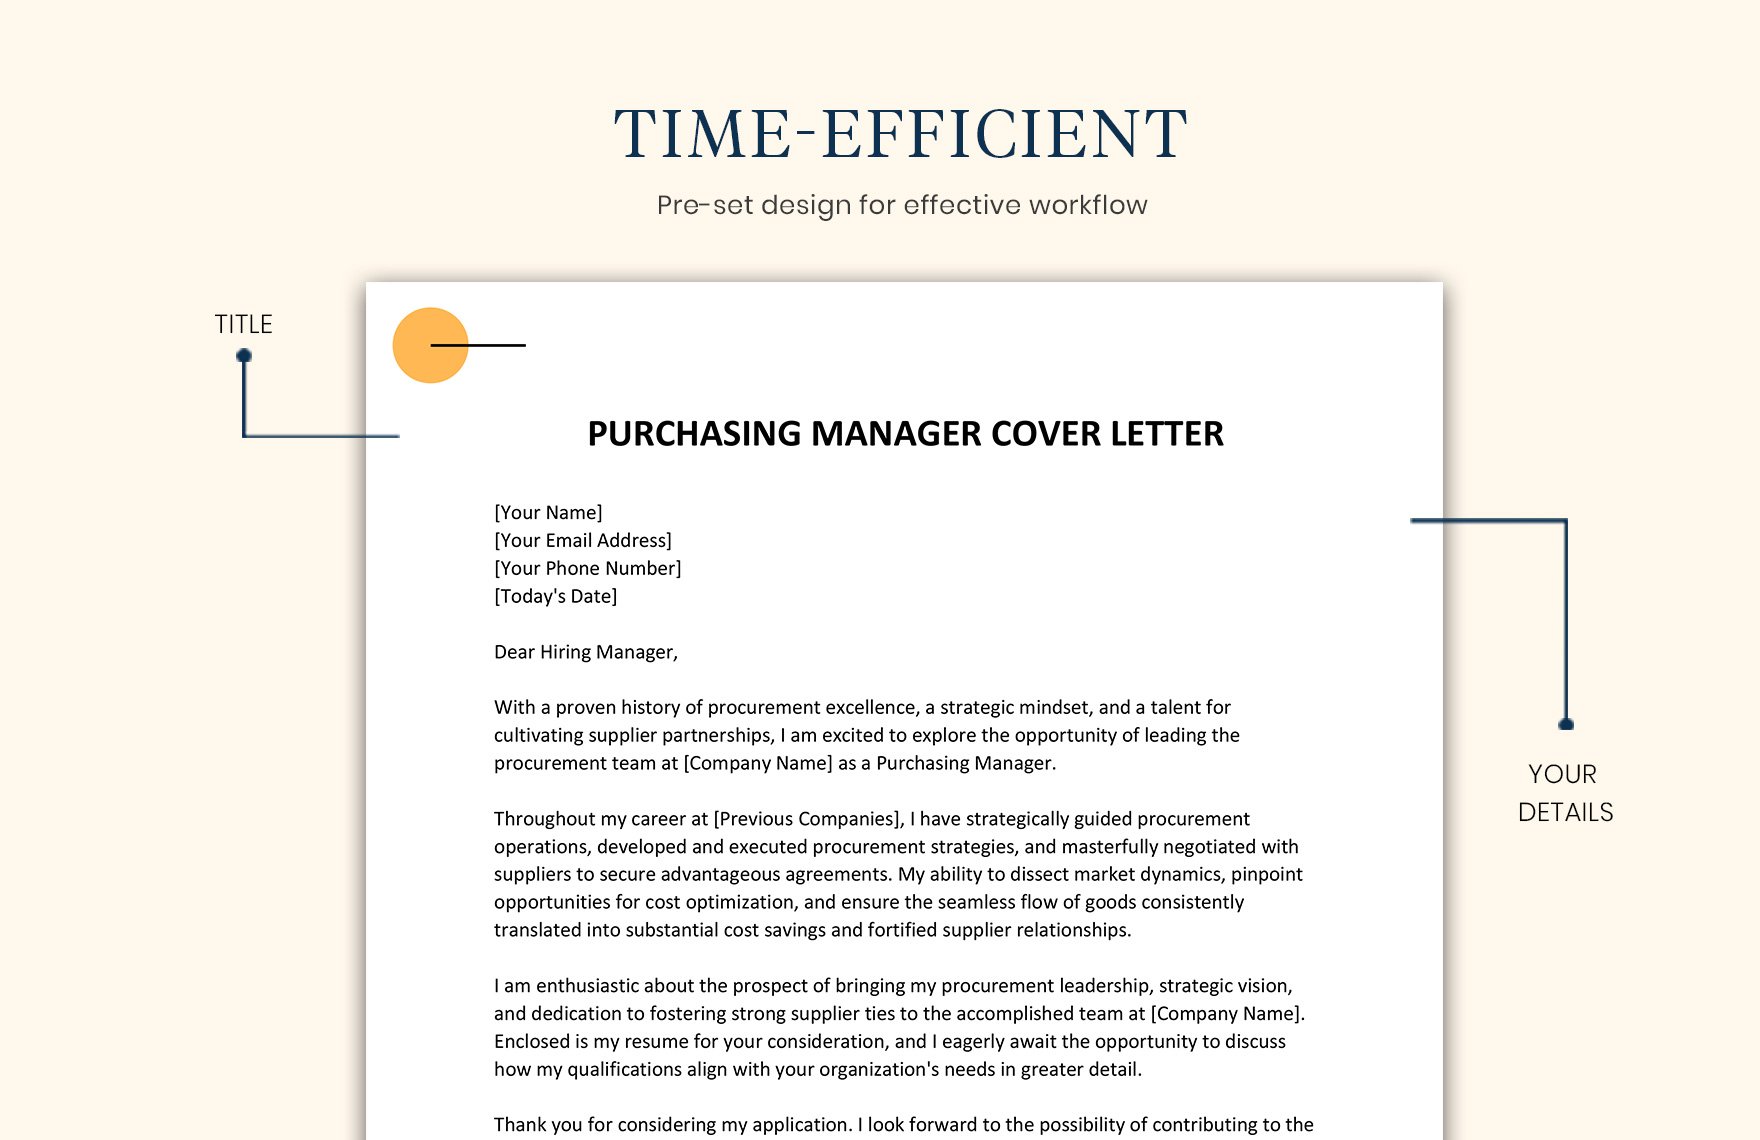 Purchasing Manager Cover Letter